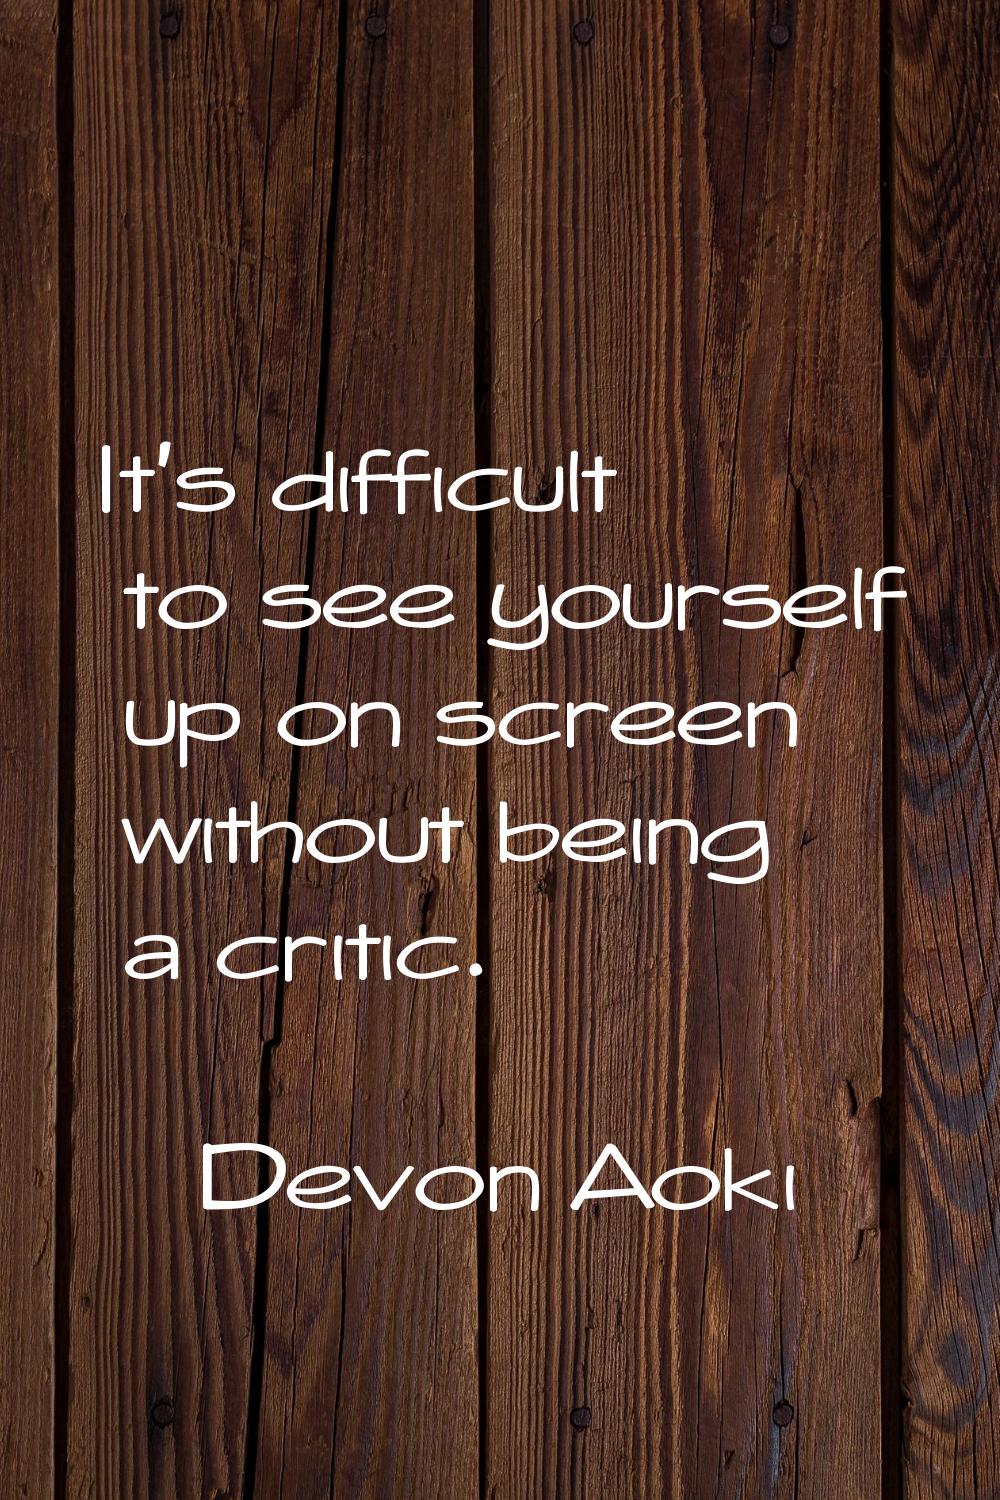 It's difficult to see yourself up on screen without being a critic.